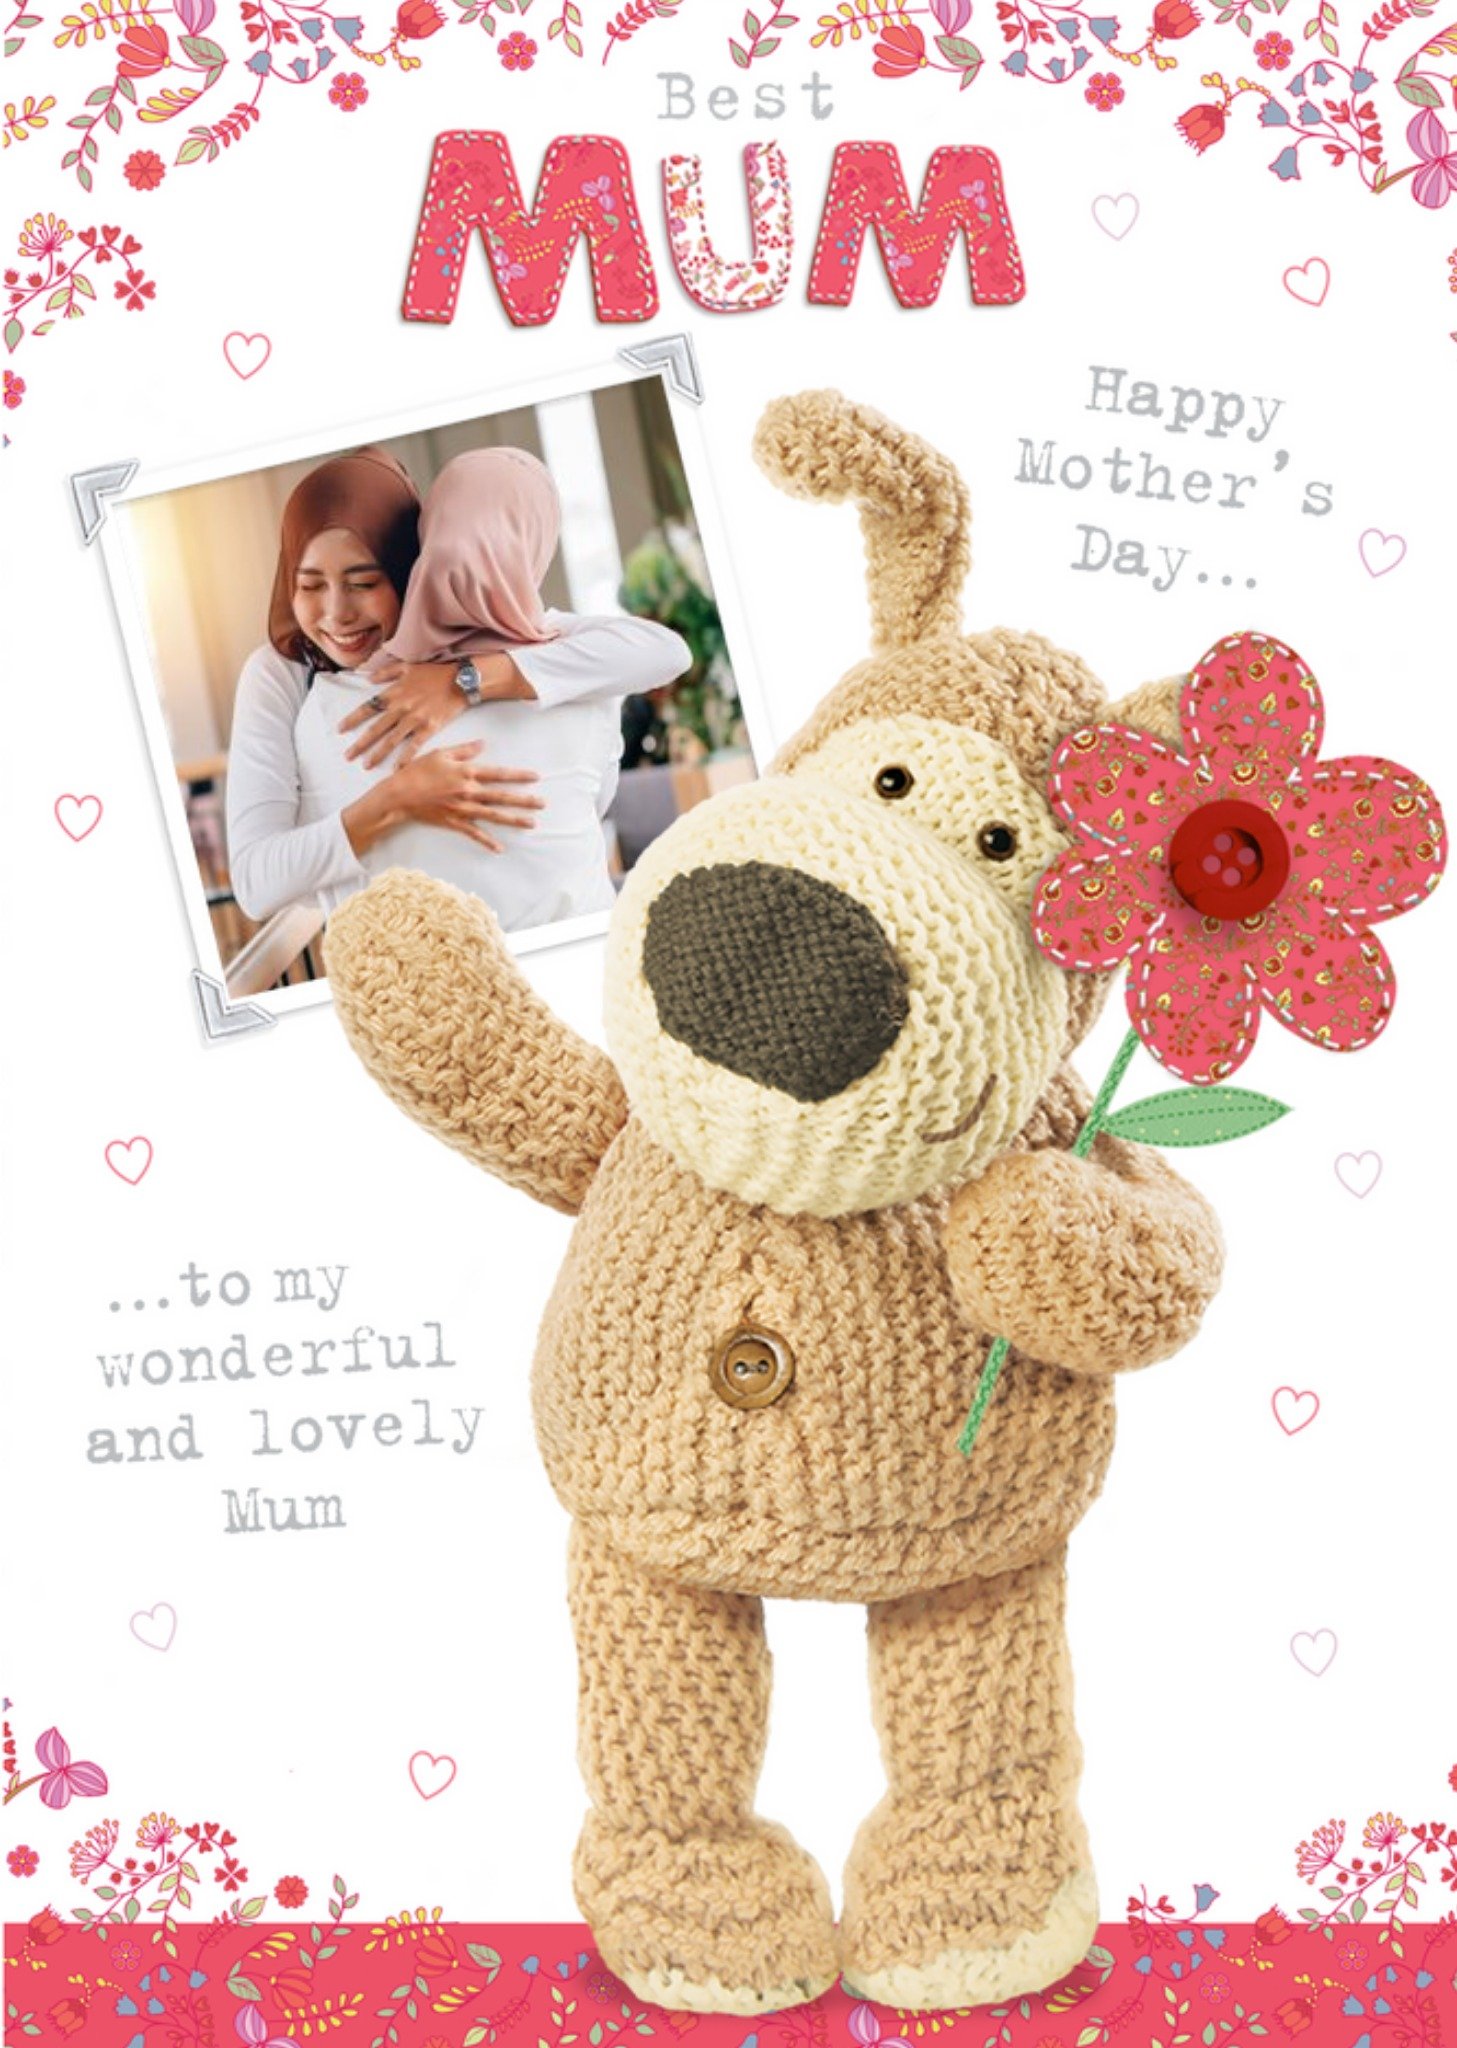 Boofle Best Mum Happy Mothers Day Card, Large